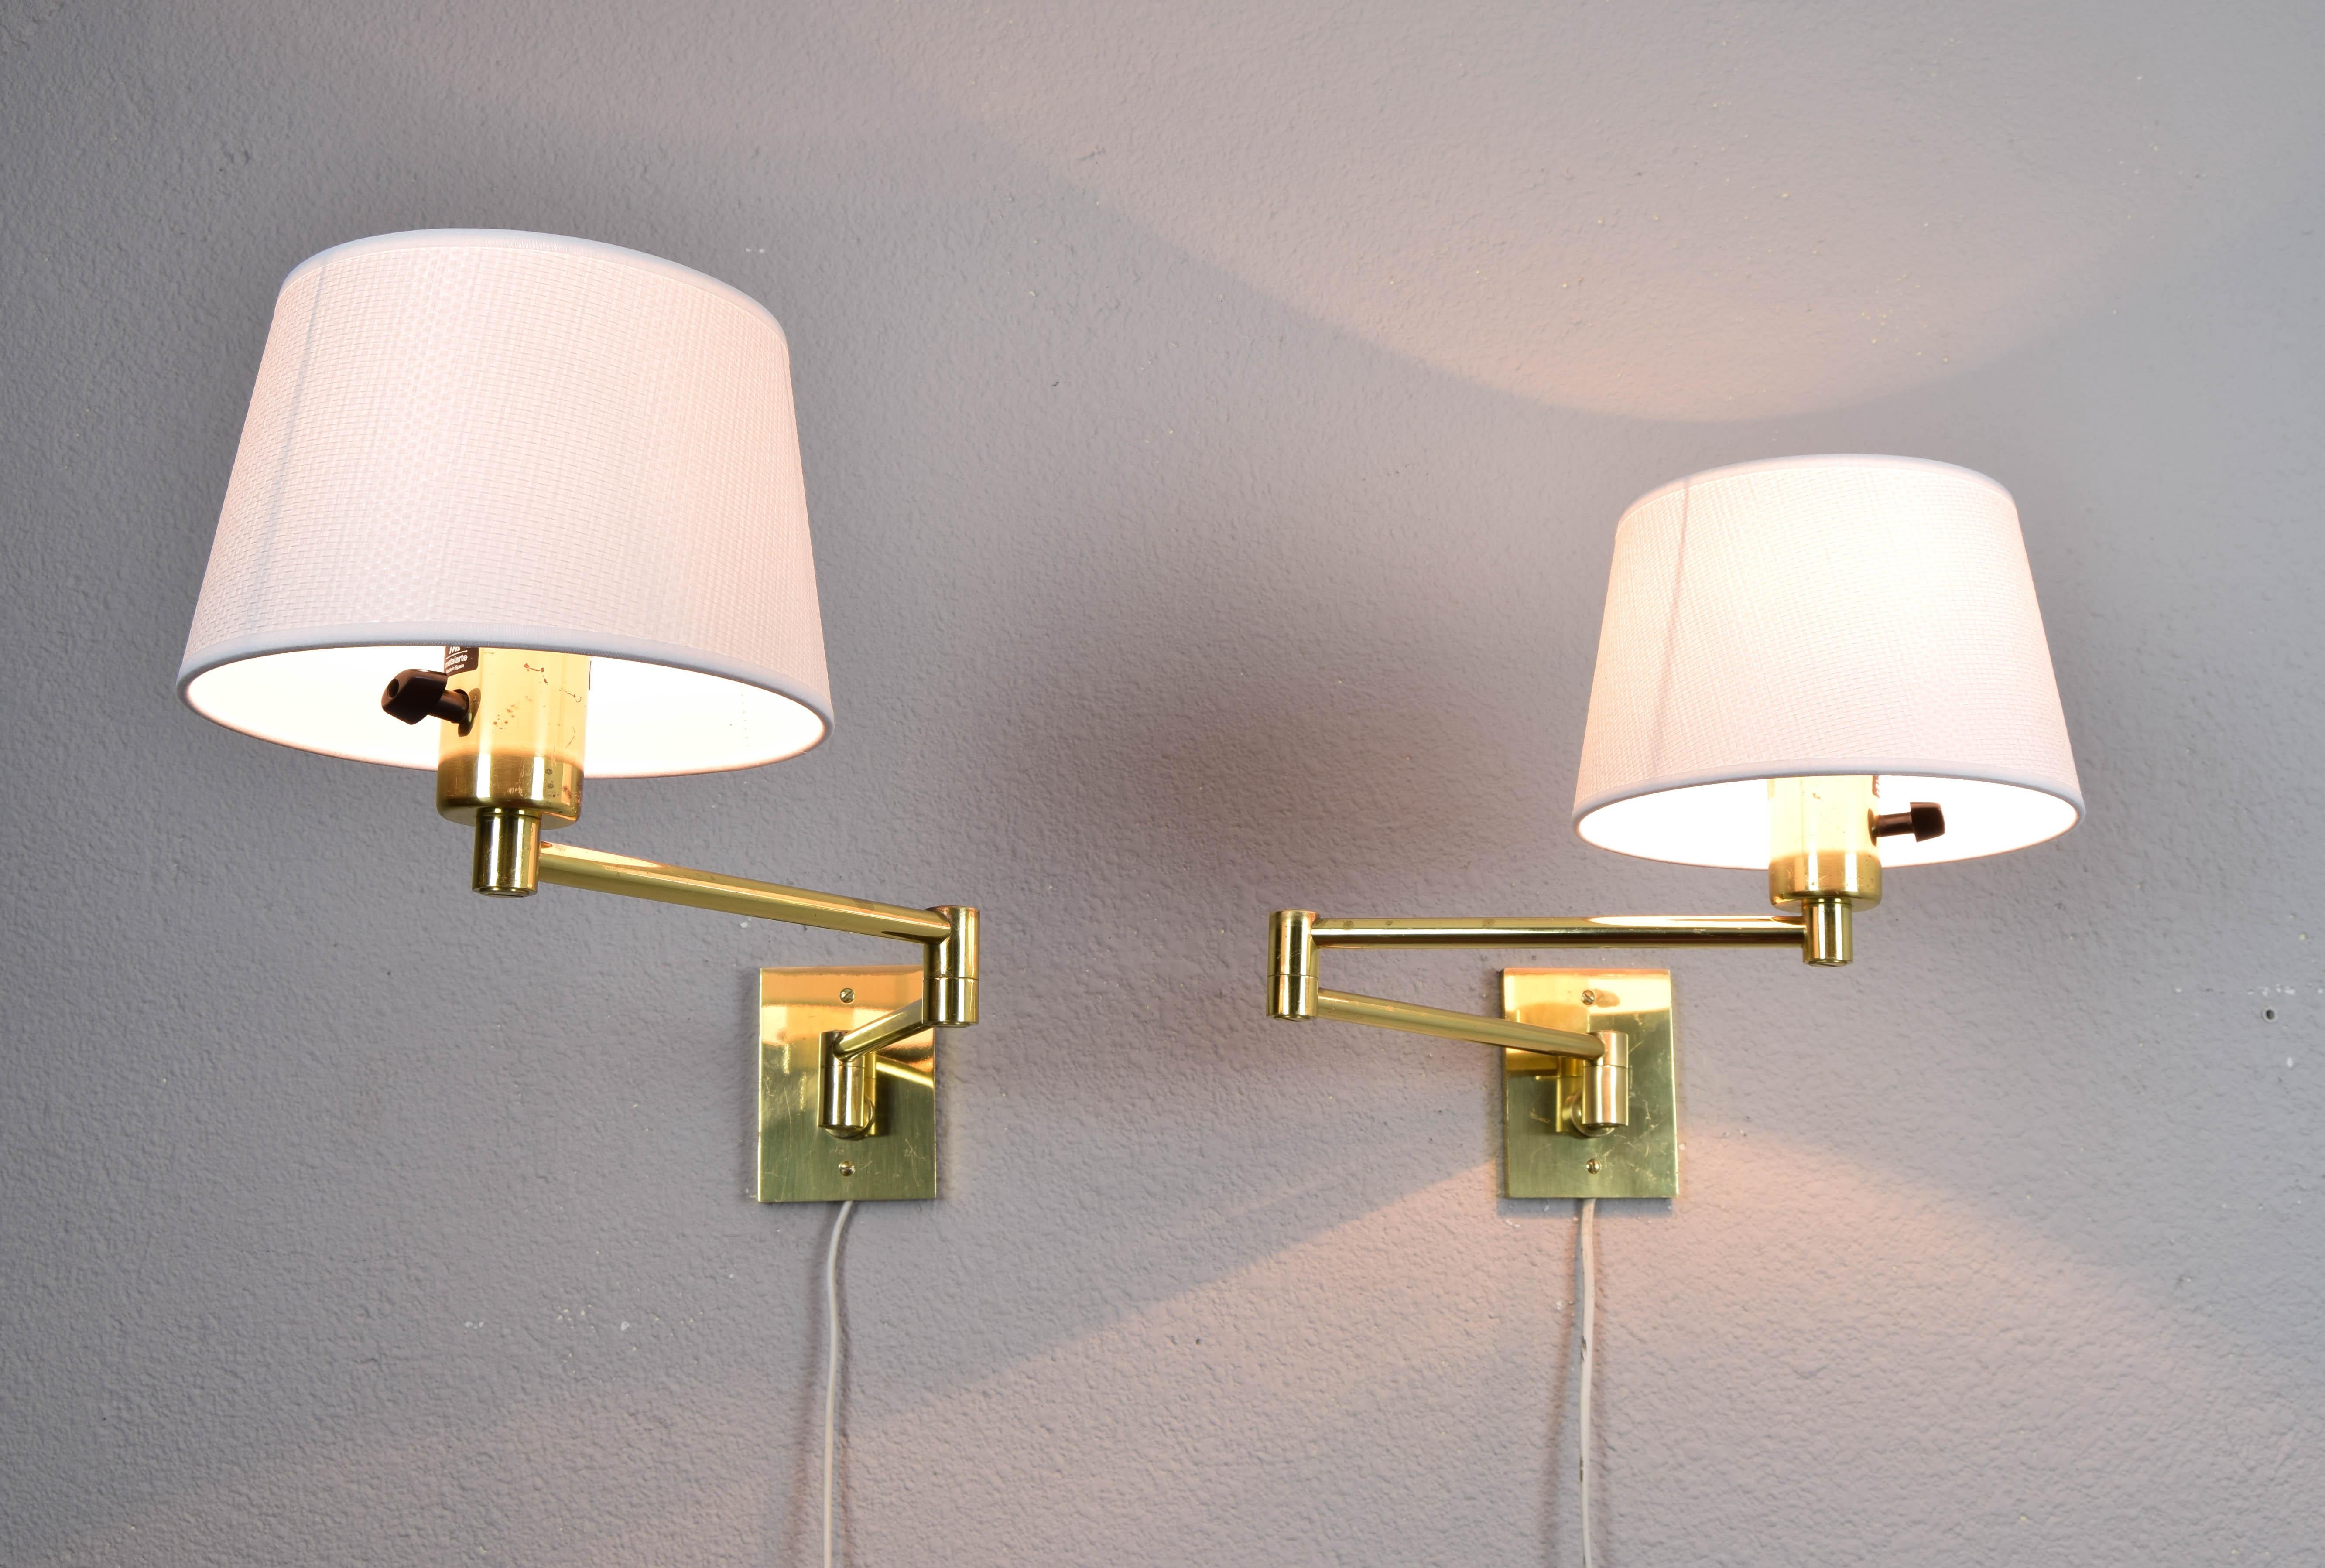 Two Mid-Century Modern Swing Arm Brass Sconces by George W Hansen for Metalarte 1